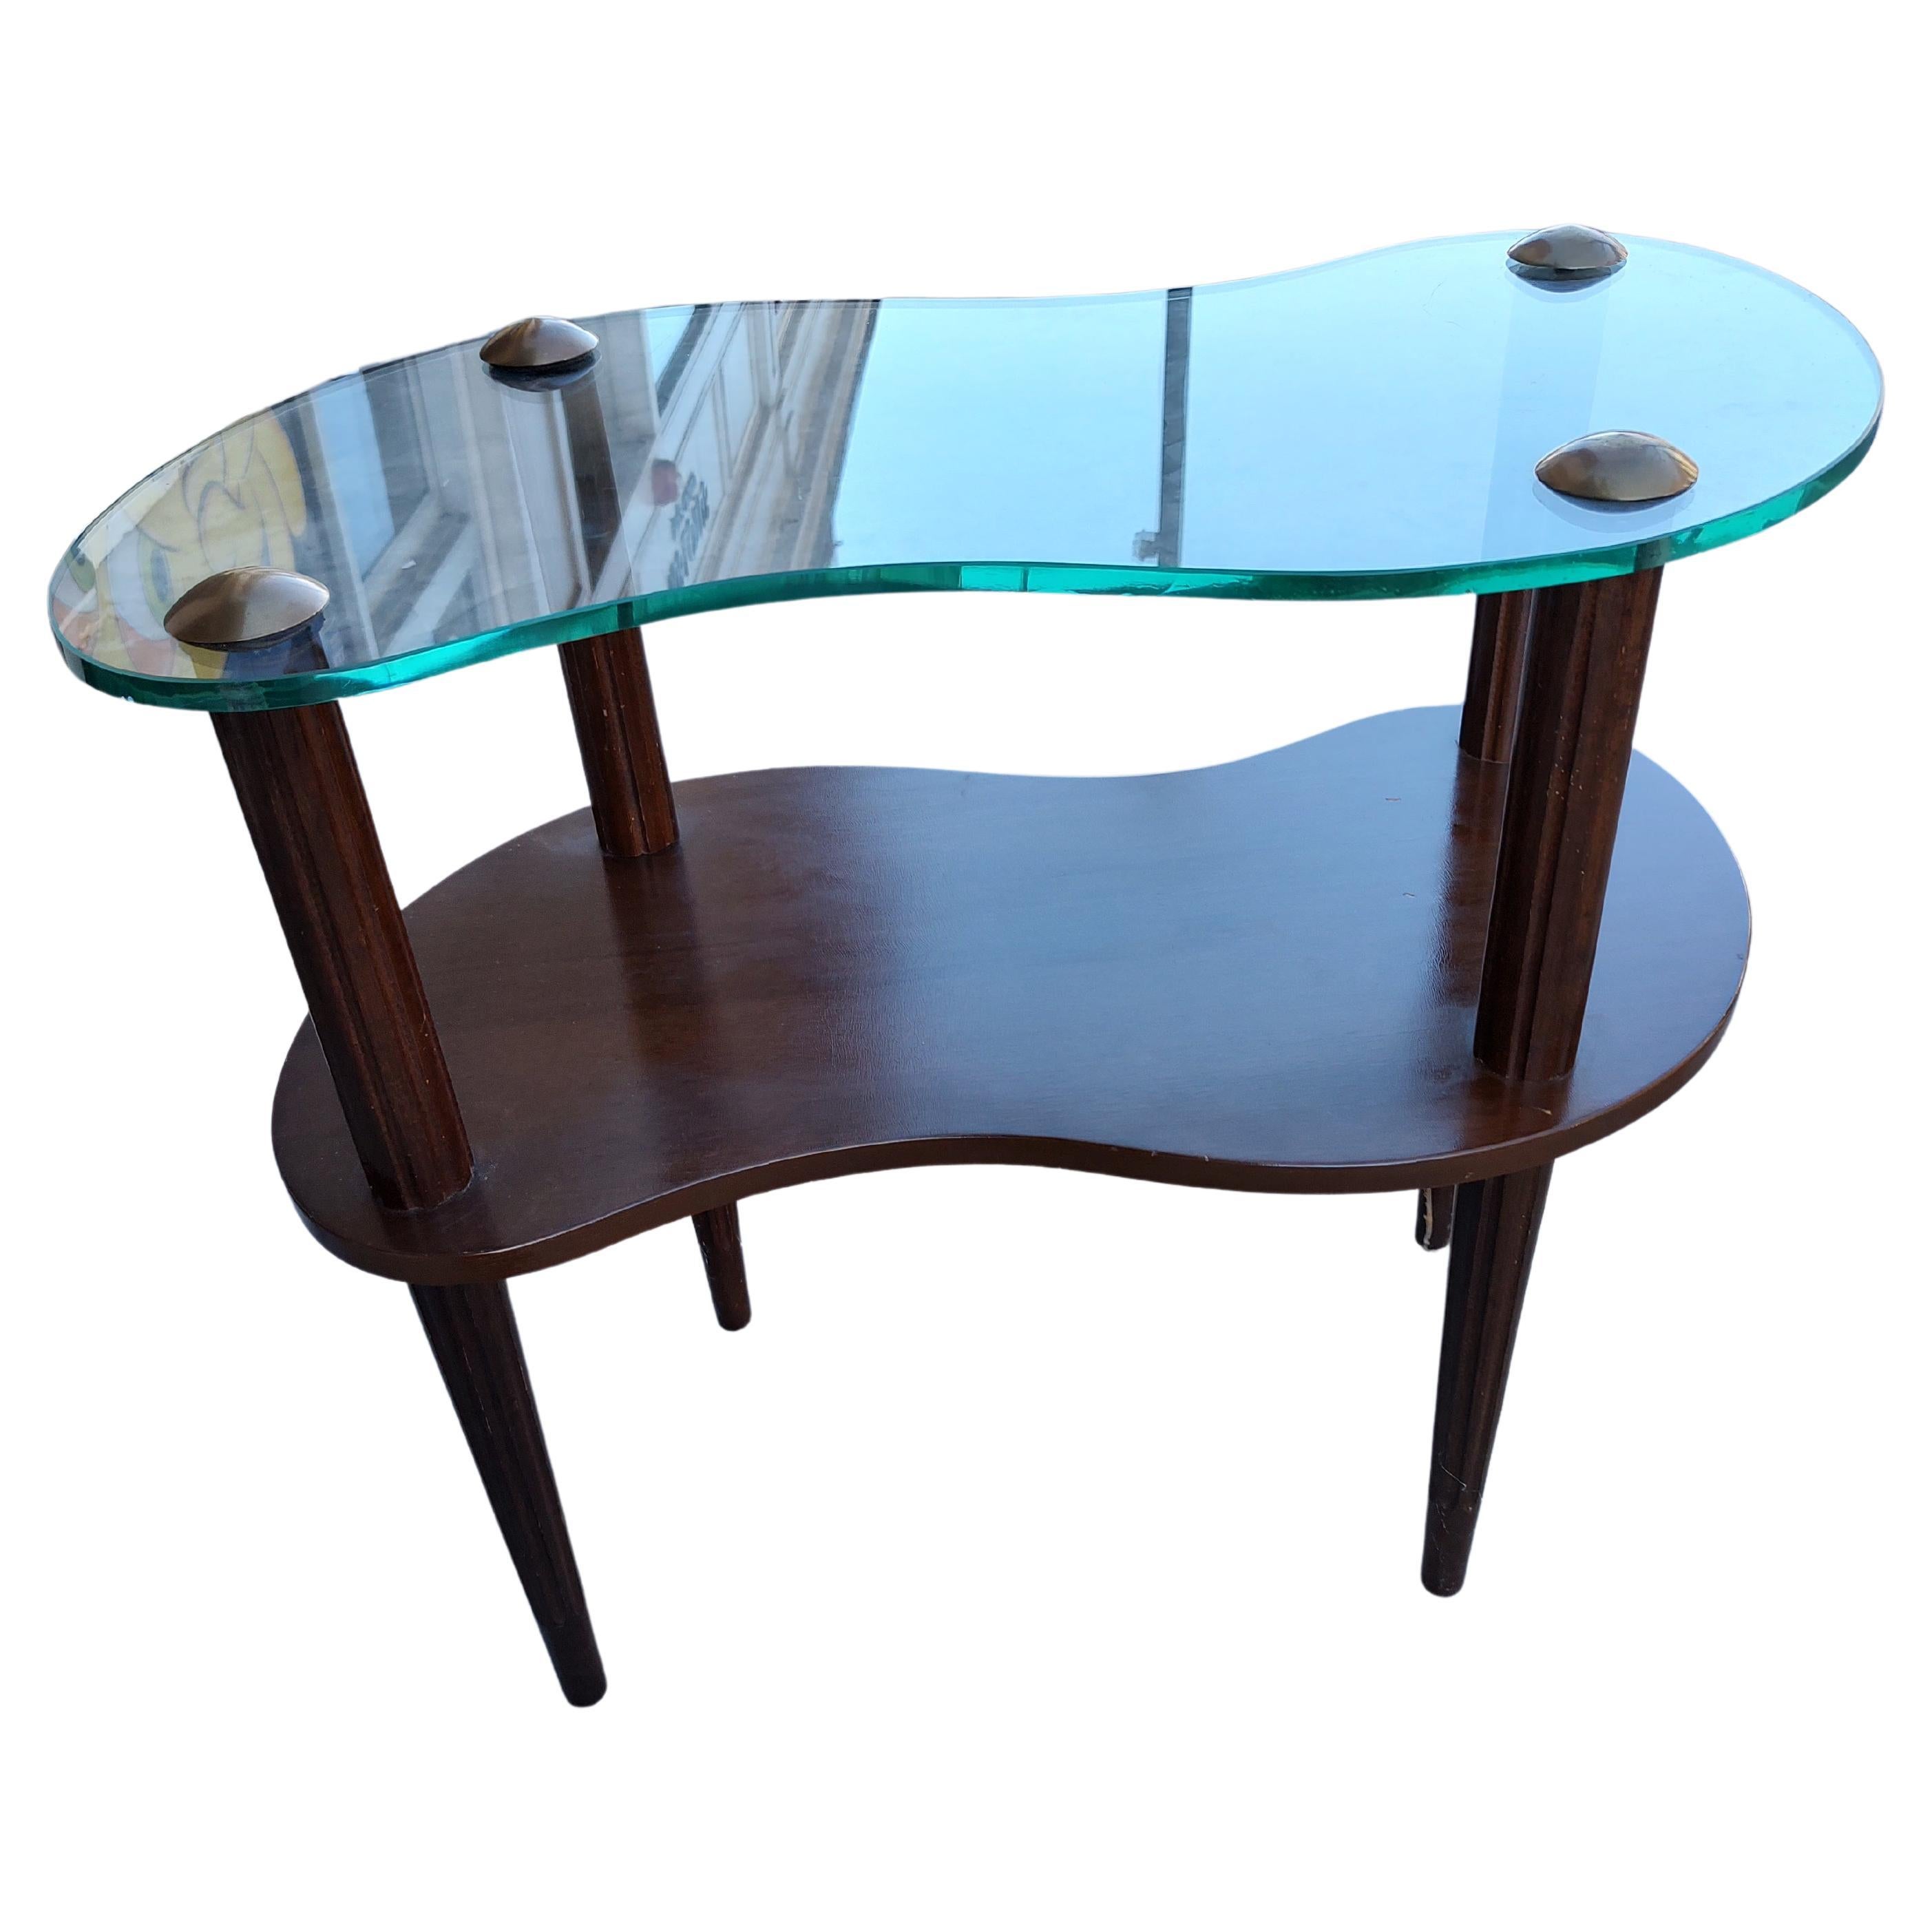 Pair of Mid-Century Modern Art Deco Cloud Tables Attributed to Gilbert Rohde  In Good Condition For Sale In Port Jervis, NY